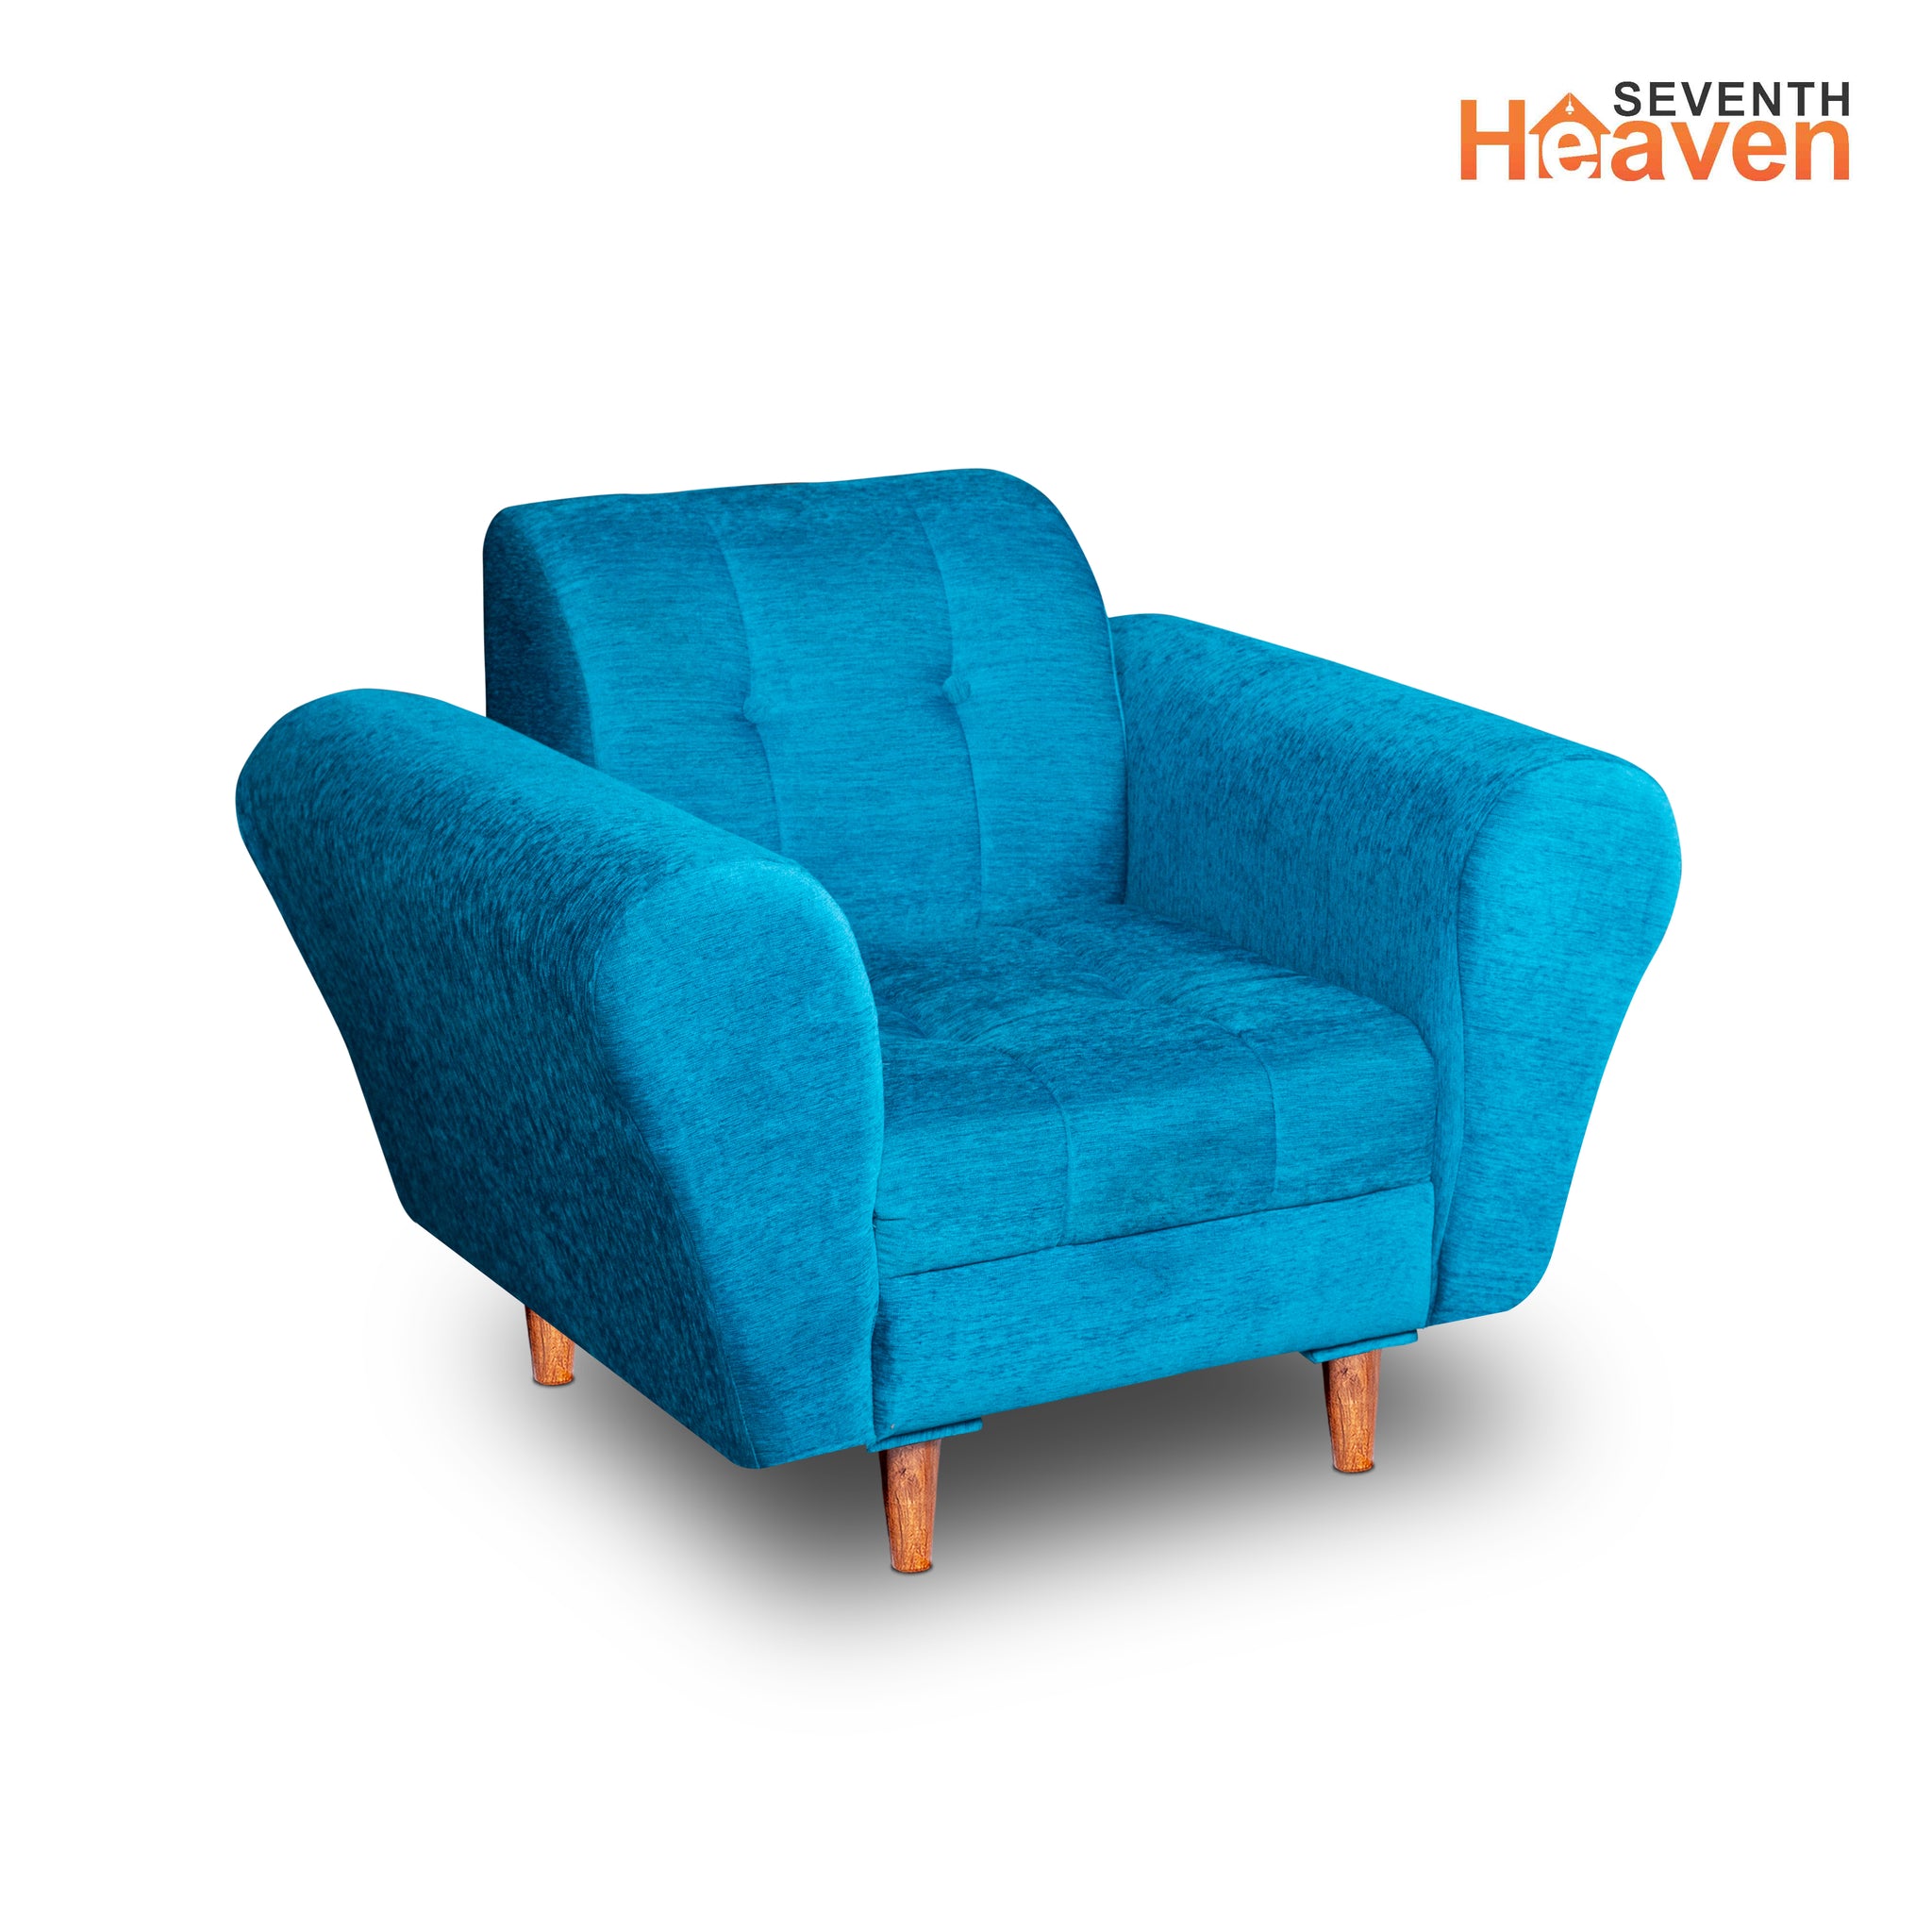 Seventh Heaven Milan 1 Seater Wooden Sofa Set Modern & Elegant Smart Furniture Range for luxurious homes, living rooms and offices. Sky Blue Colour Molphino fabric with sheesham polished wooden legs.